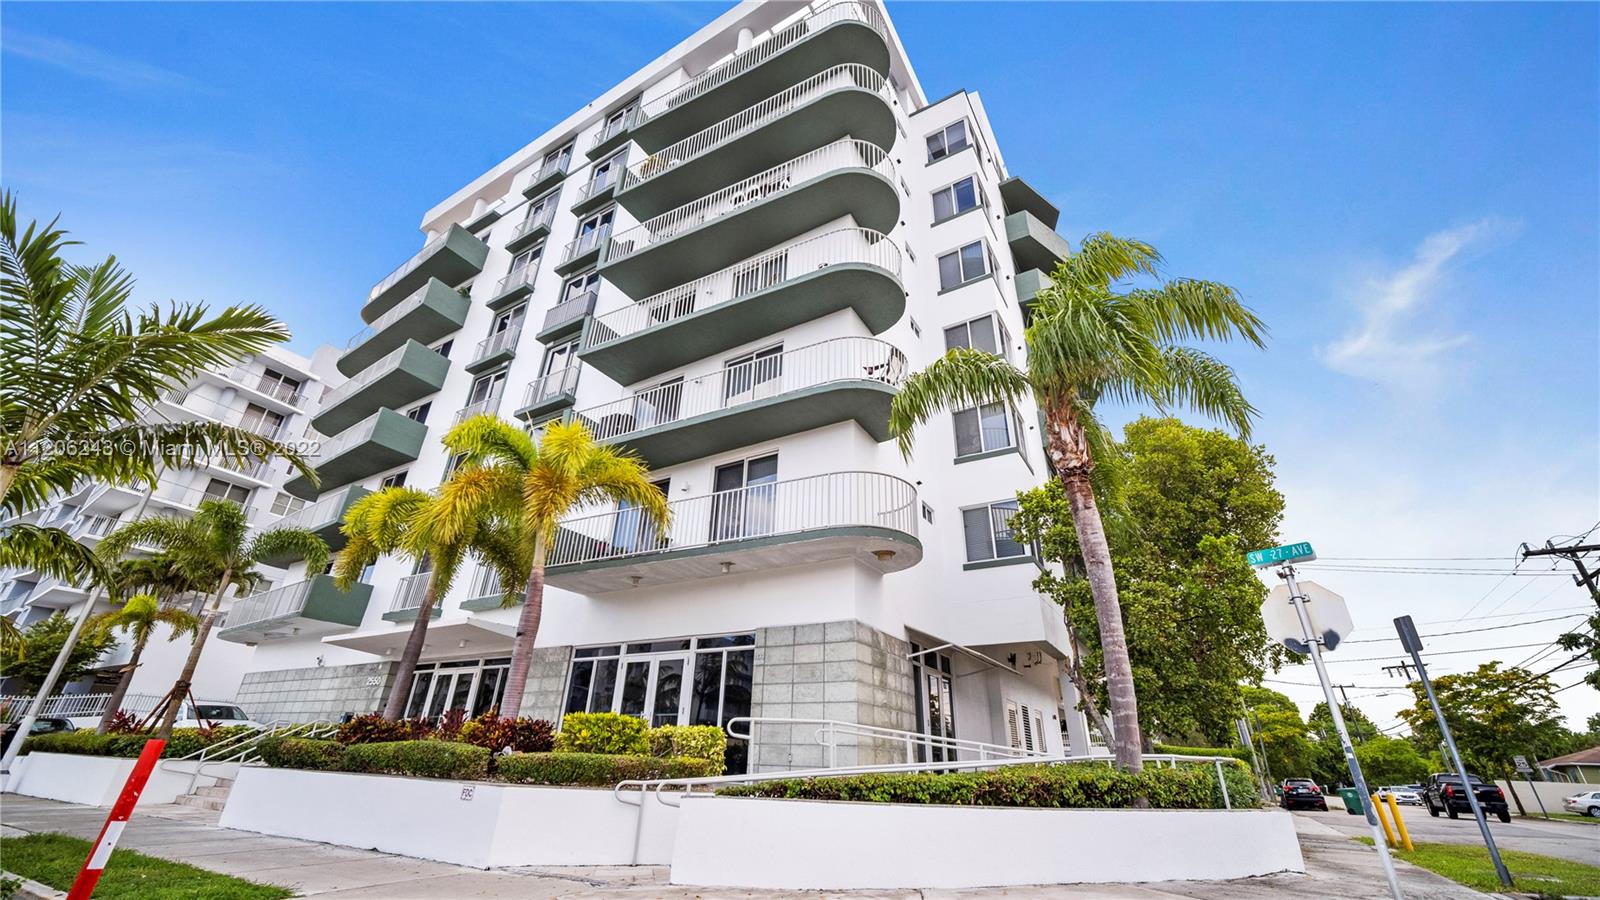 Beautiful, bright, and spacious condominium in the heart of Miami. 1 Bed/1.5 Bath unit with unobstructed city views towards Coconut Grove and Downtown Miami. Feel free to access this space either through your bedroom or living room. Large master bedroom features a comfortable walk-in closet plus a separate smaller closet. The Grove View condo building is at a perfect location where Coconut Grove, Coral Gables, the Roads, Key Biscayne, and even Brickell are just a short drive away. The building also features great amenities including gated parking, pool, gym, and security call box. Down the street is Coral Way where you can find many popular restaurants and shops. Move-in ready! A Beautiful Miami Home!